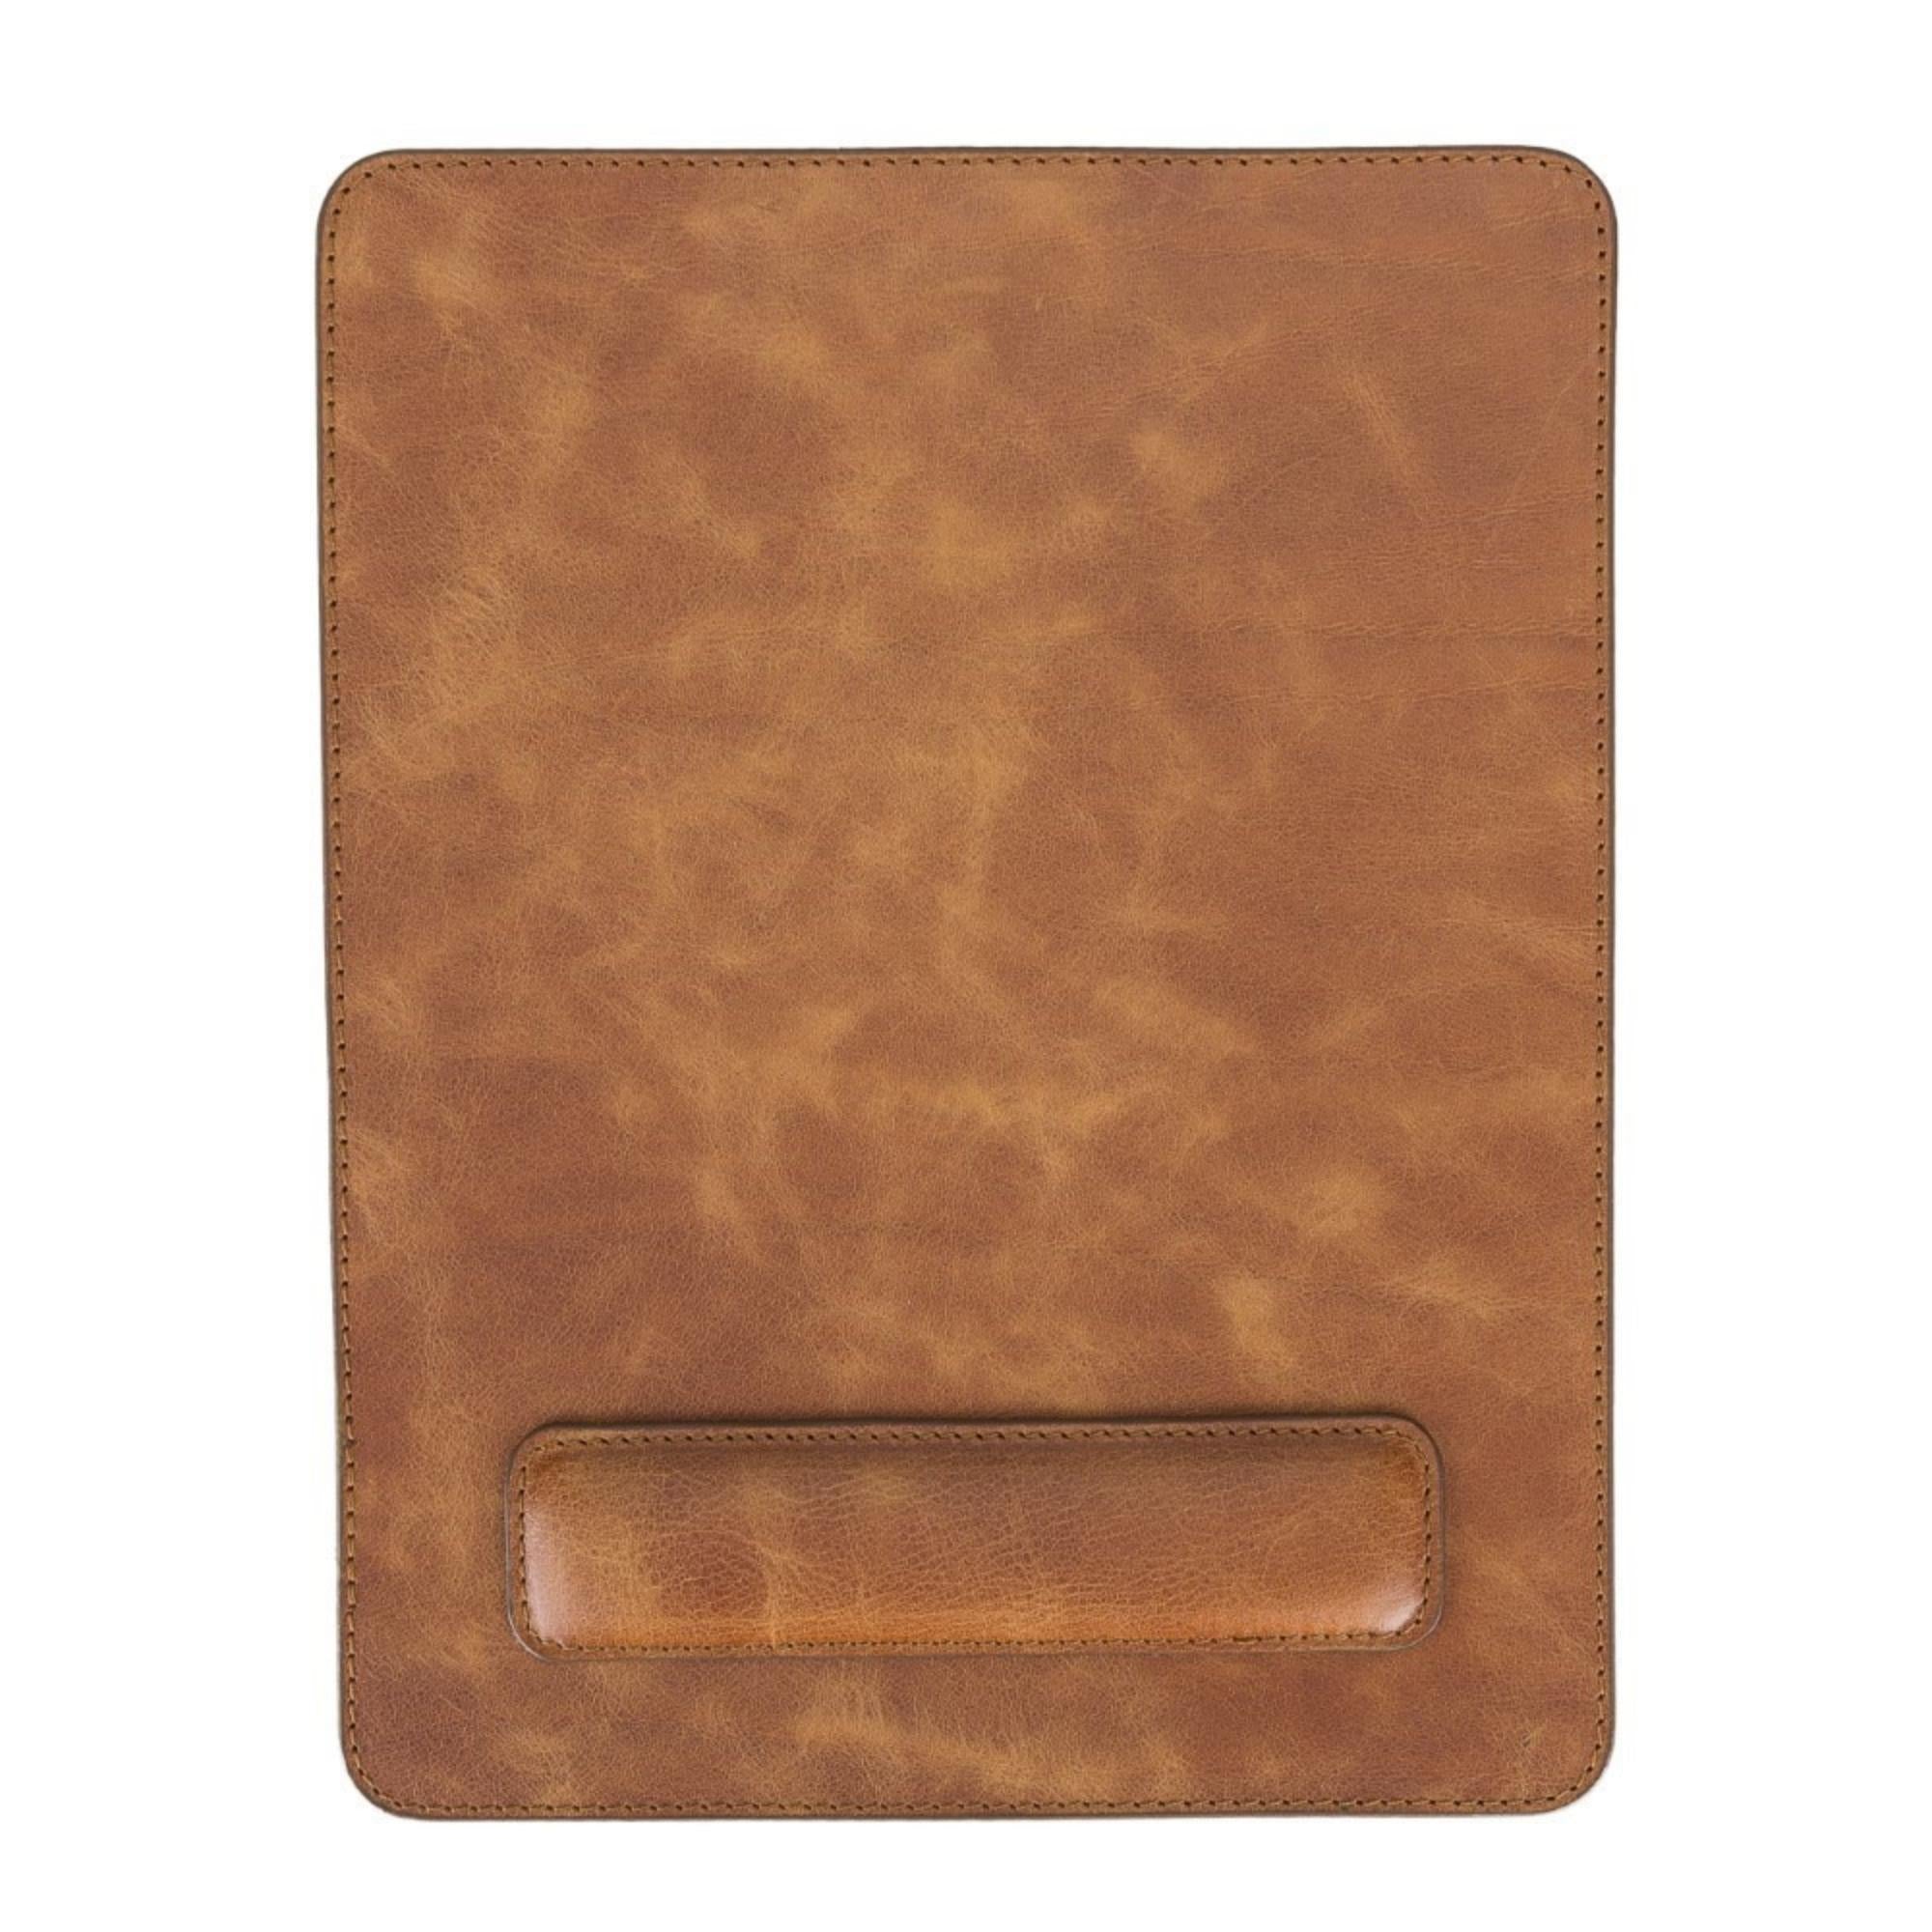 Boulder Full-Grain Leather Mouse Pad with Hand Support-Light Brown---TORONATA